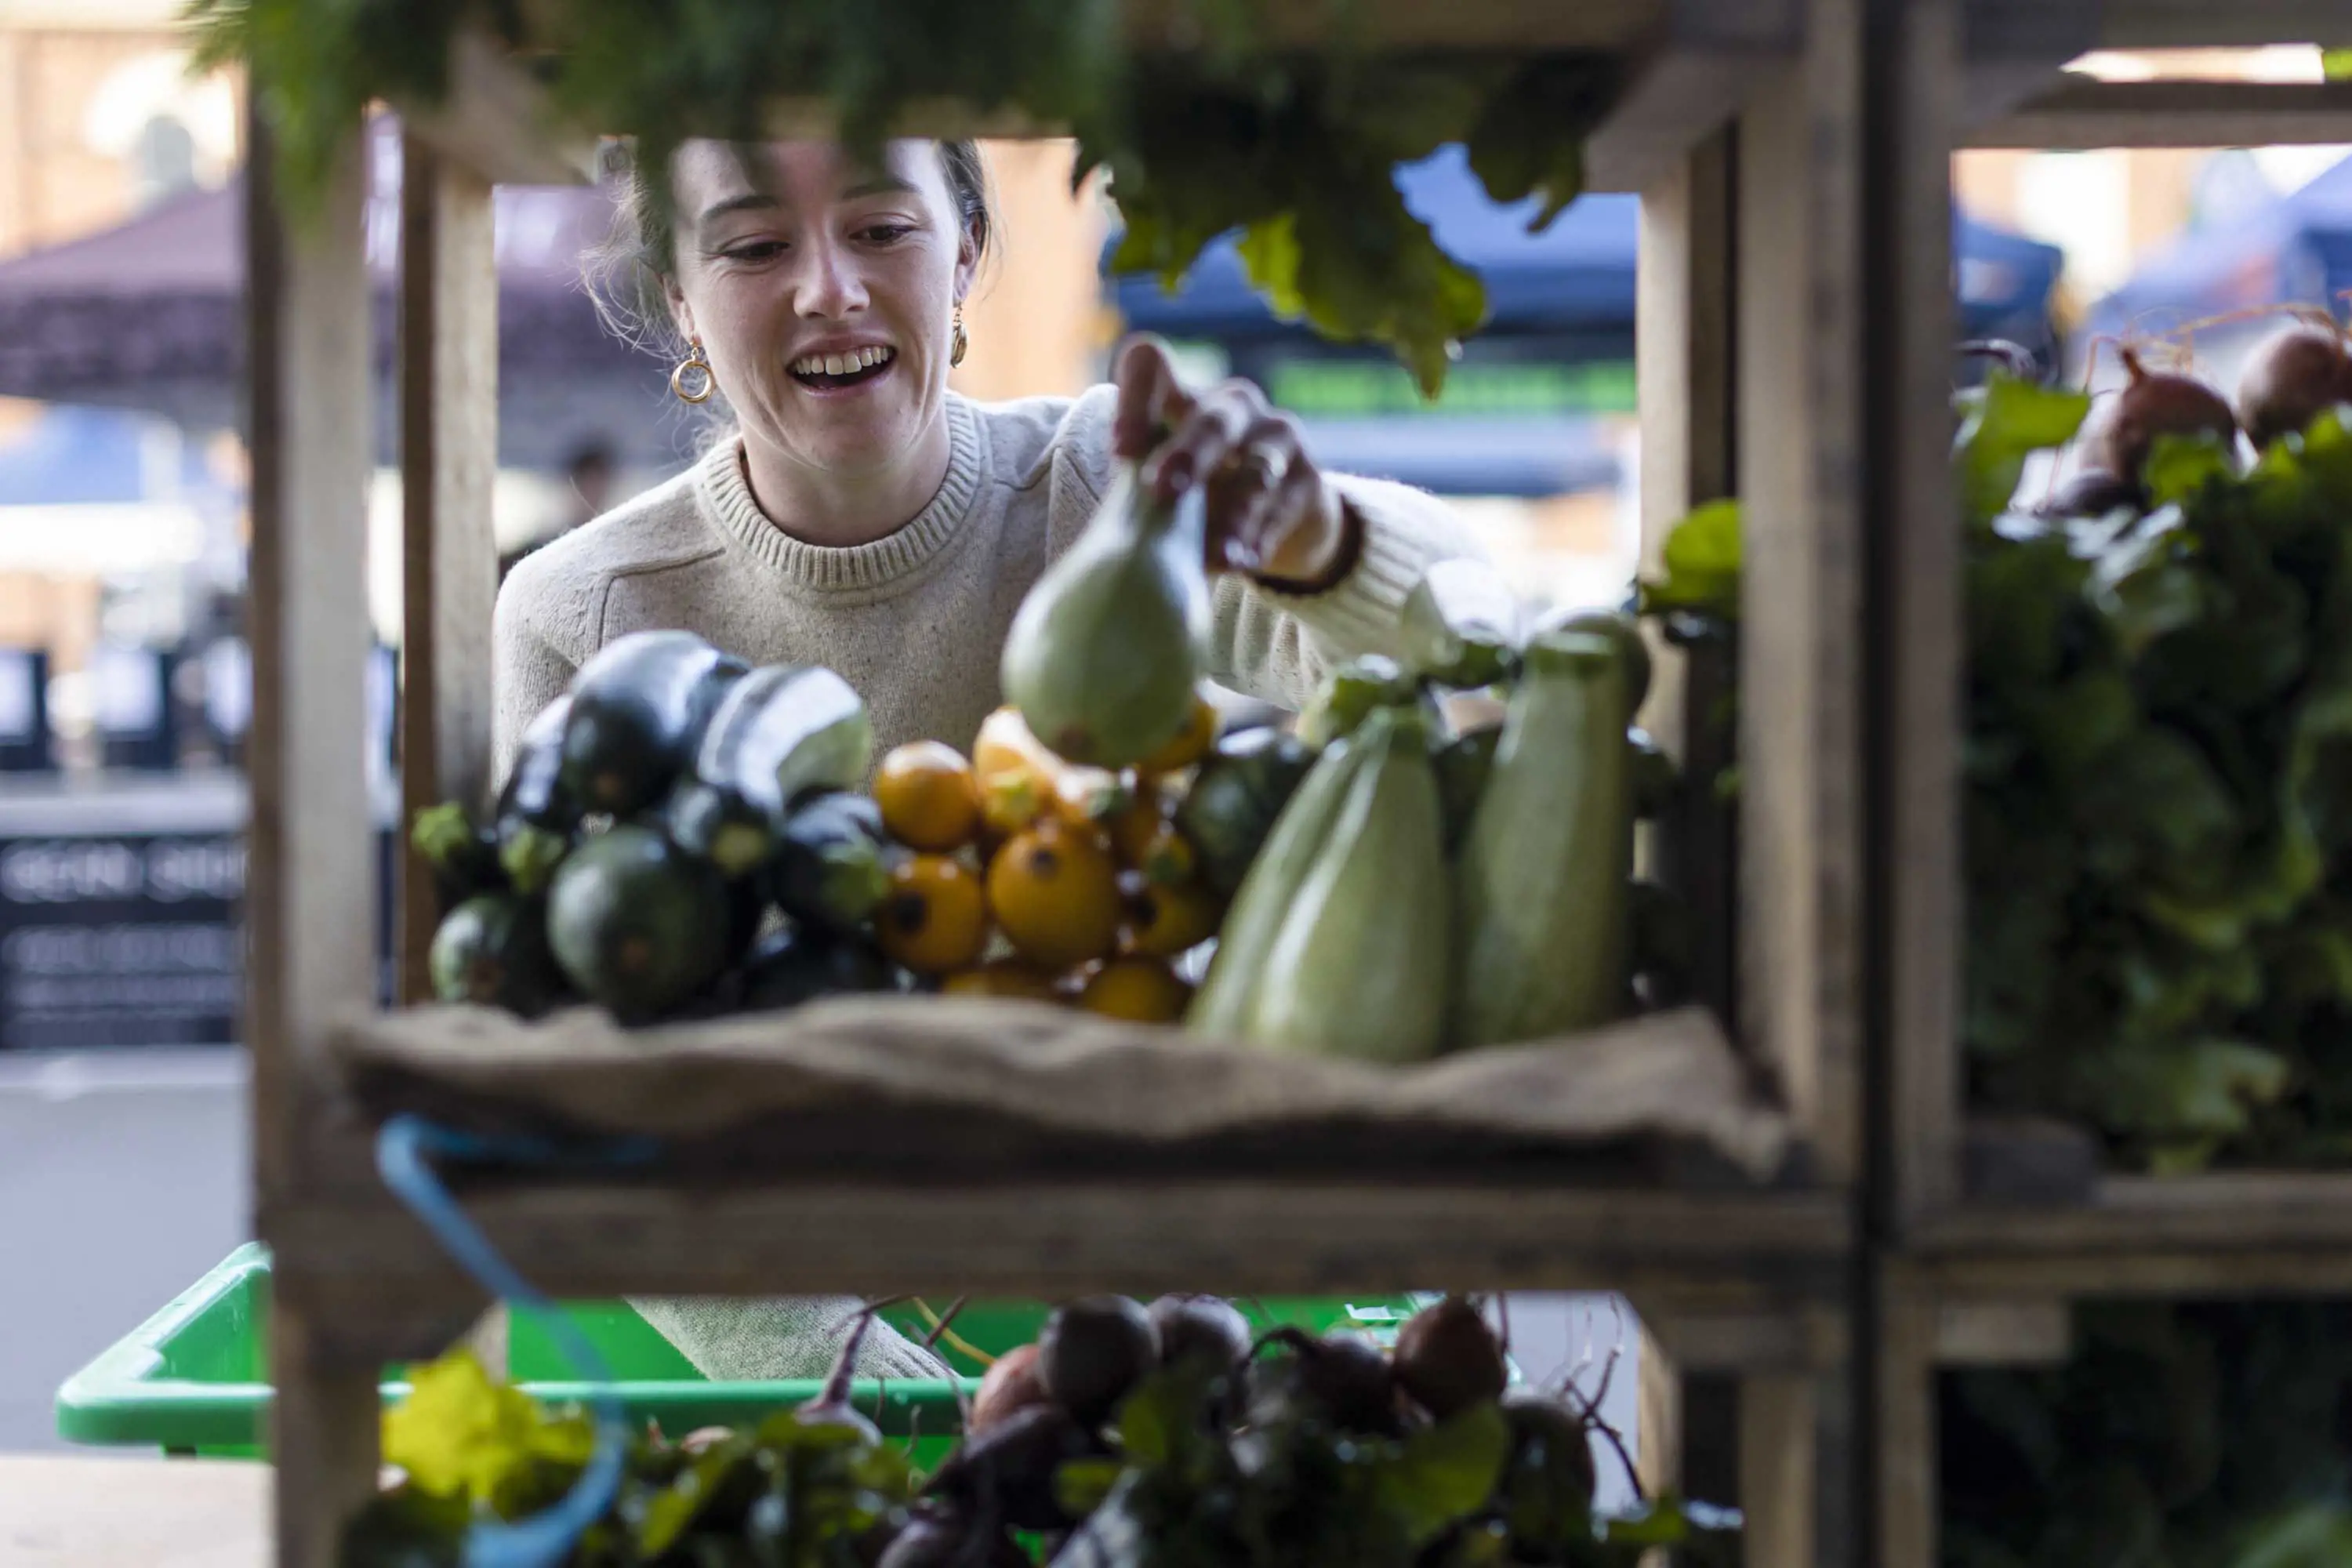 A young woman looks at fresh vegetables stacked on a shelf in a stall.